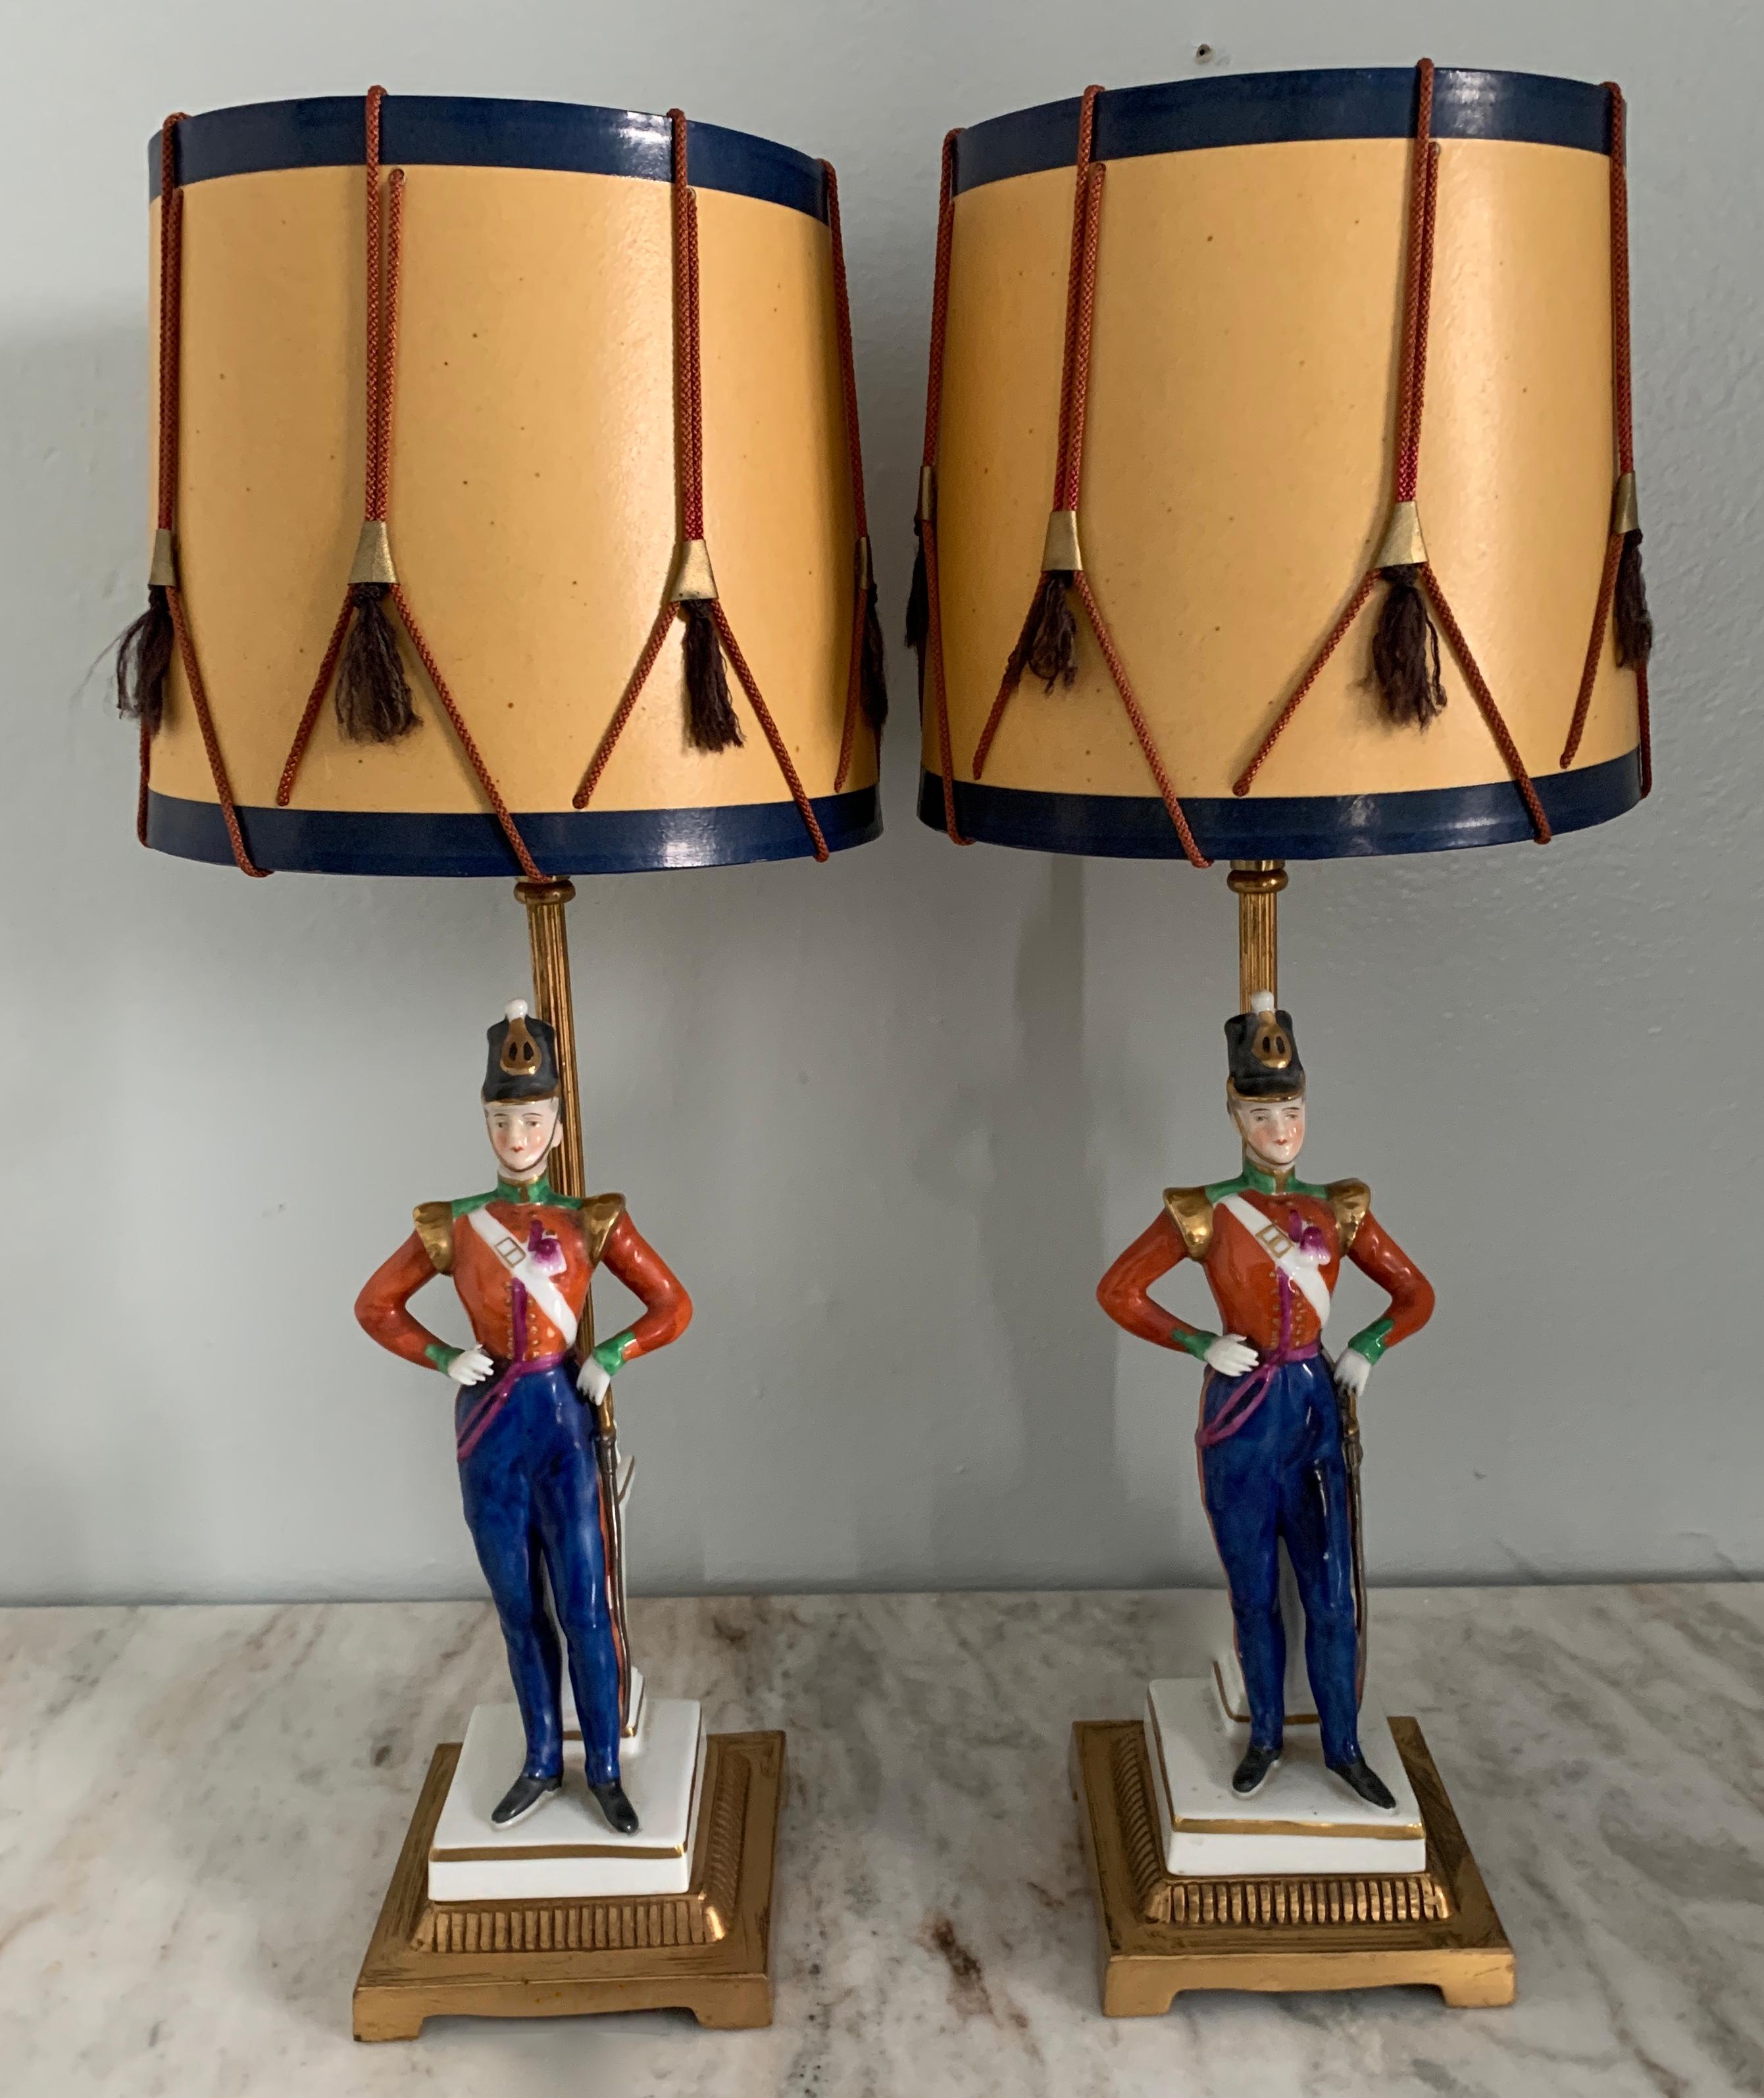 Gilt Pair of German Porcelain Soldier Lamps on Bronze Mounts with Drummer Shades